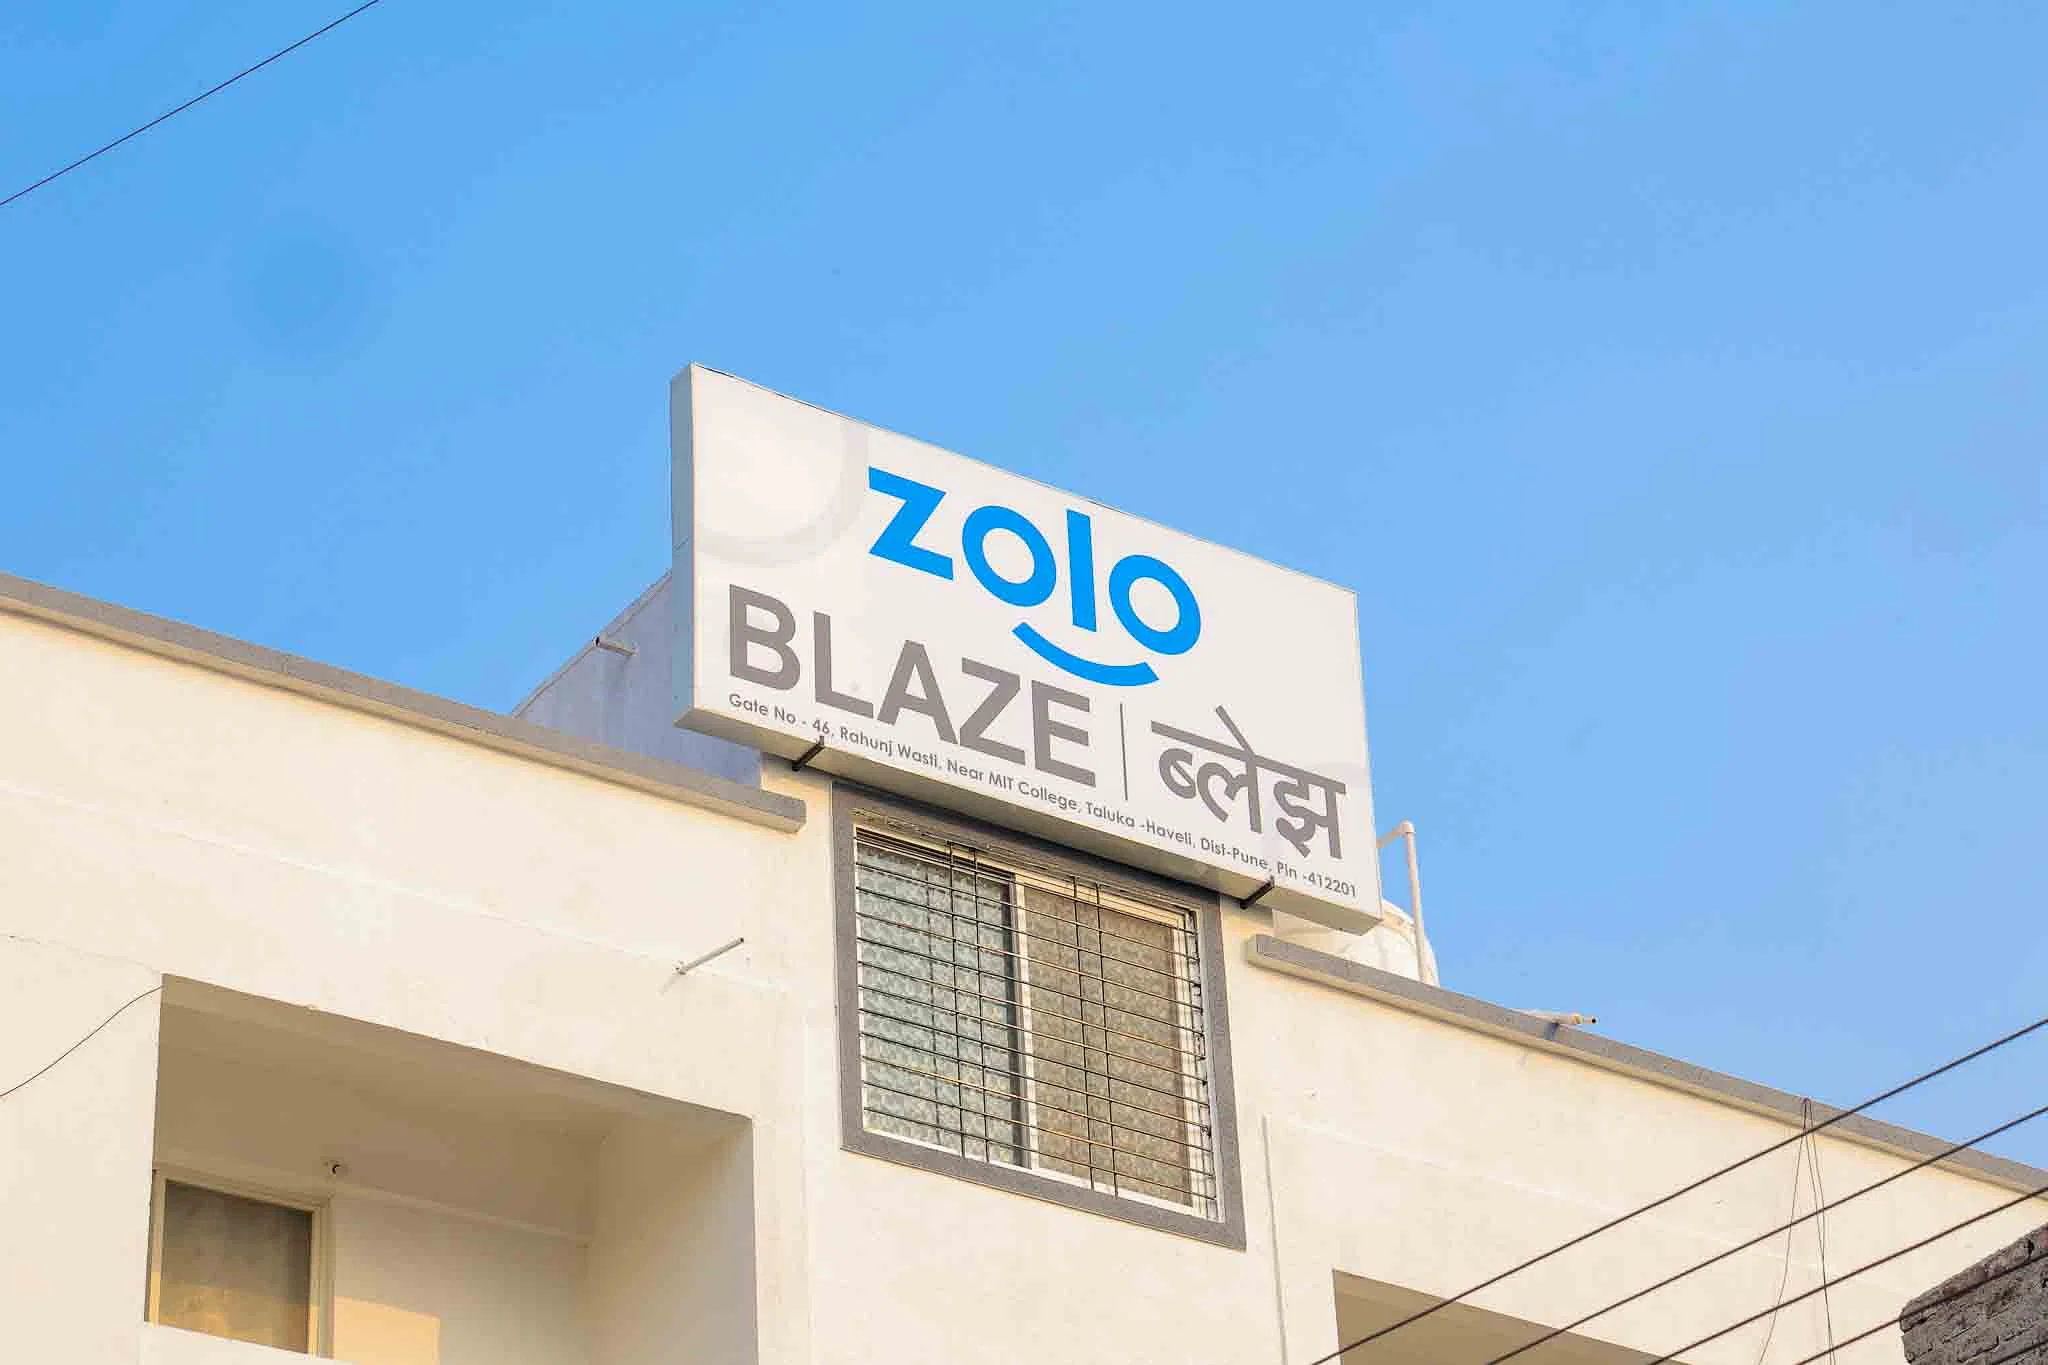 fully furnished Zolo single rooms for rent near me-check out now-Zolo Blaze